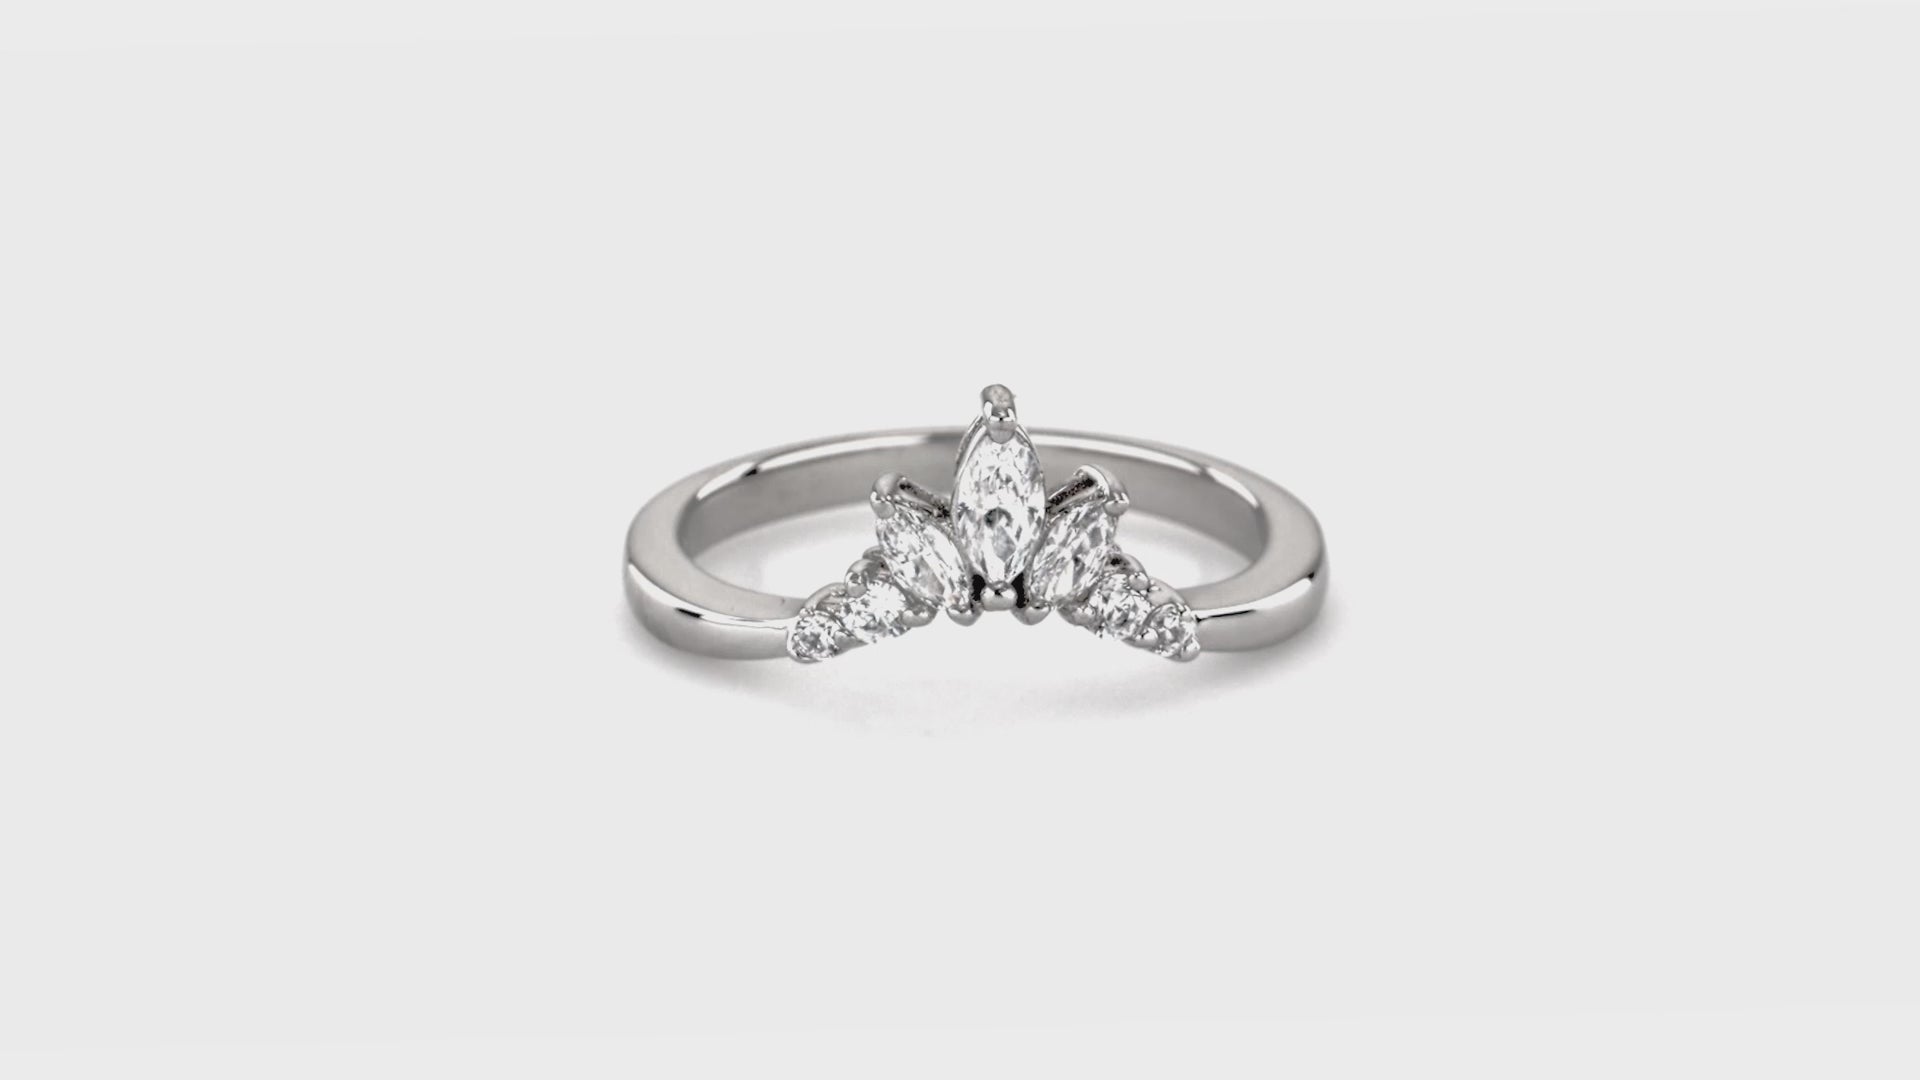 Video Contains 3-Stone 7-Stone Round CZ Ring Set in Sterling Silver. Style Number VR446-02